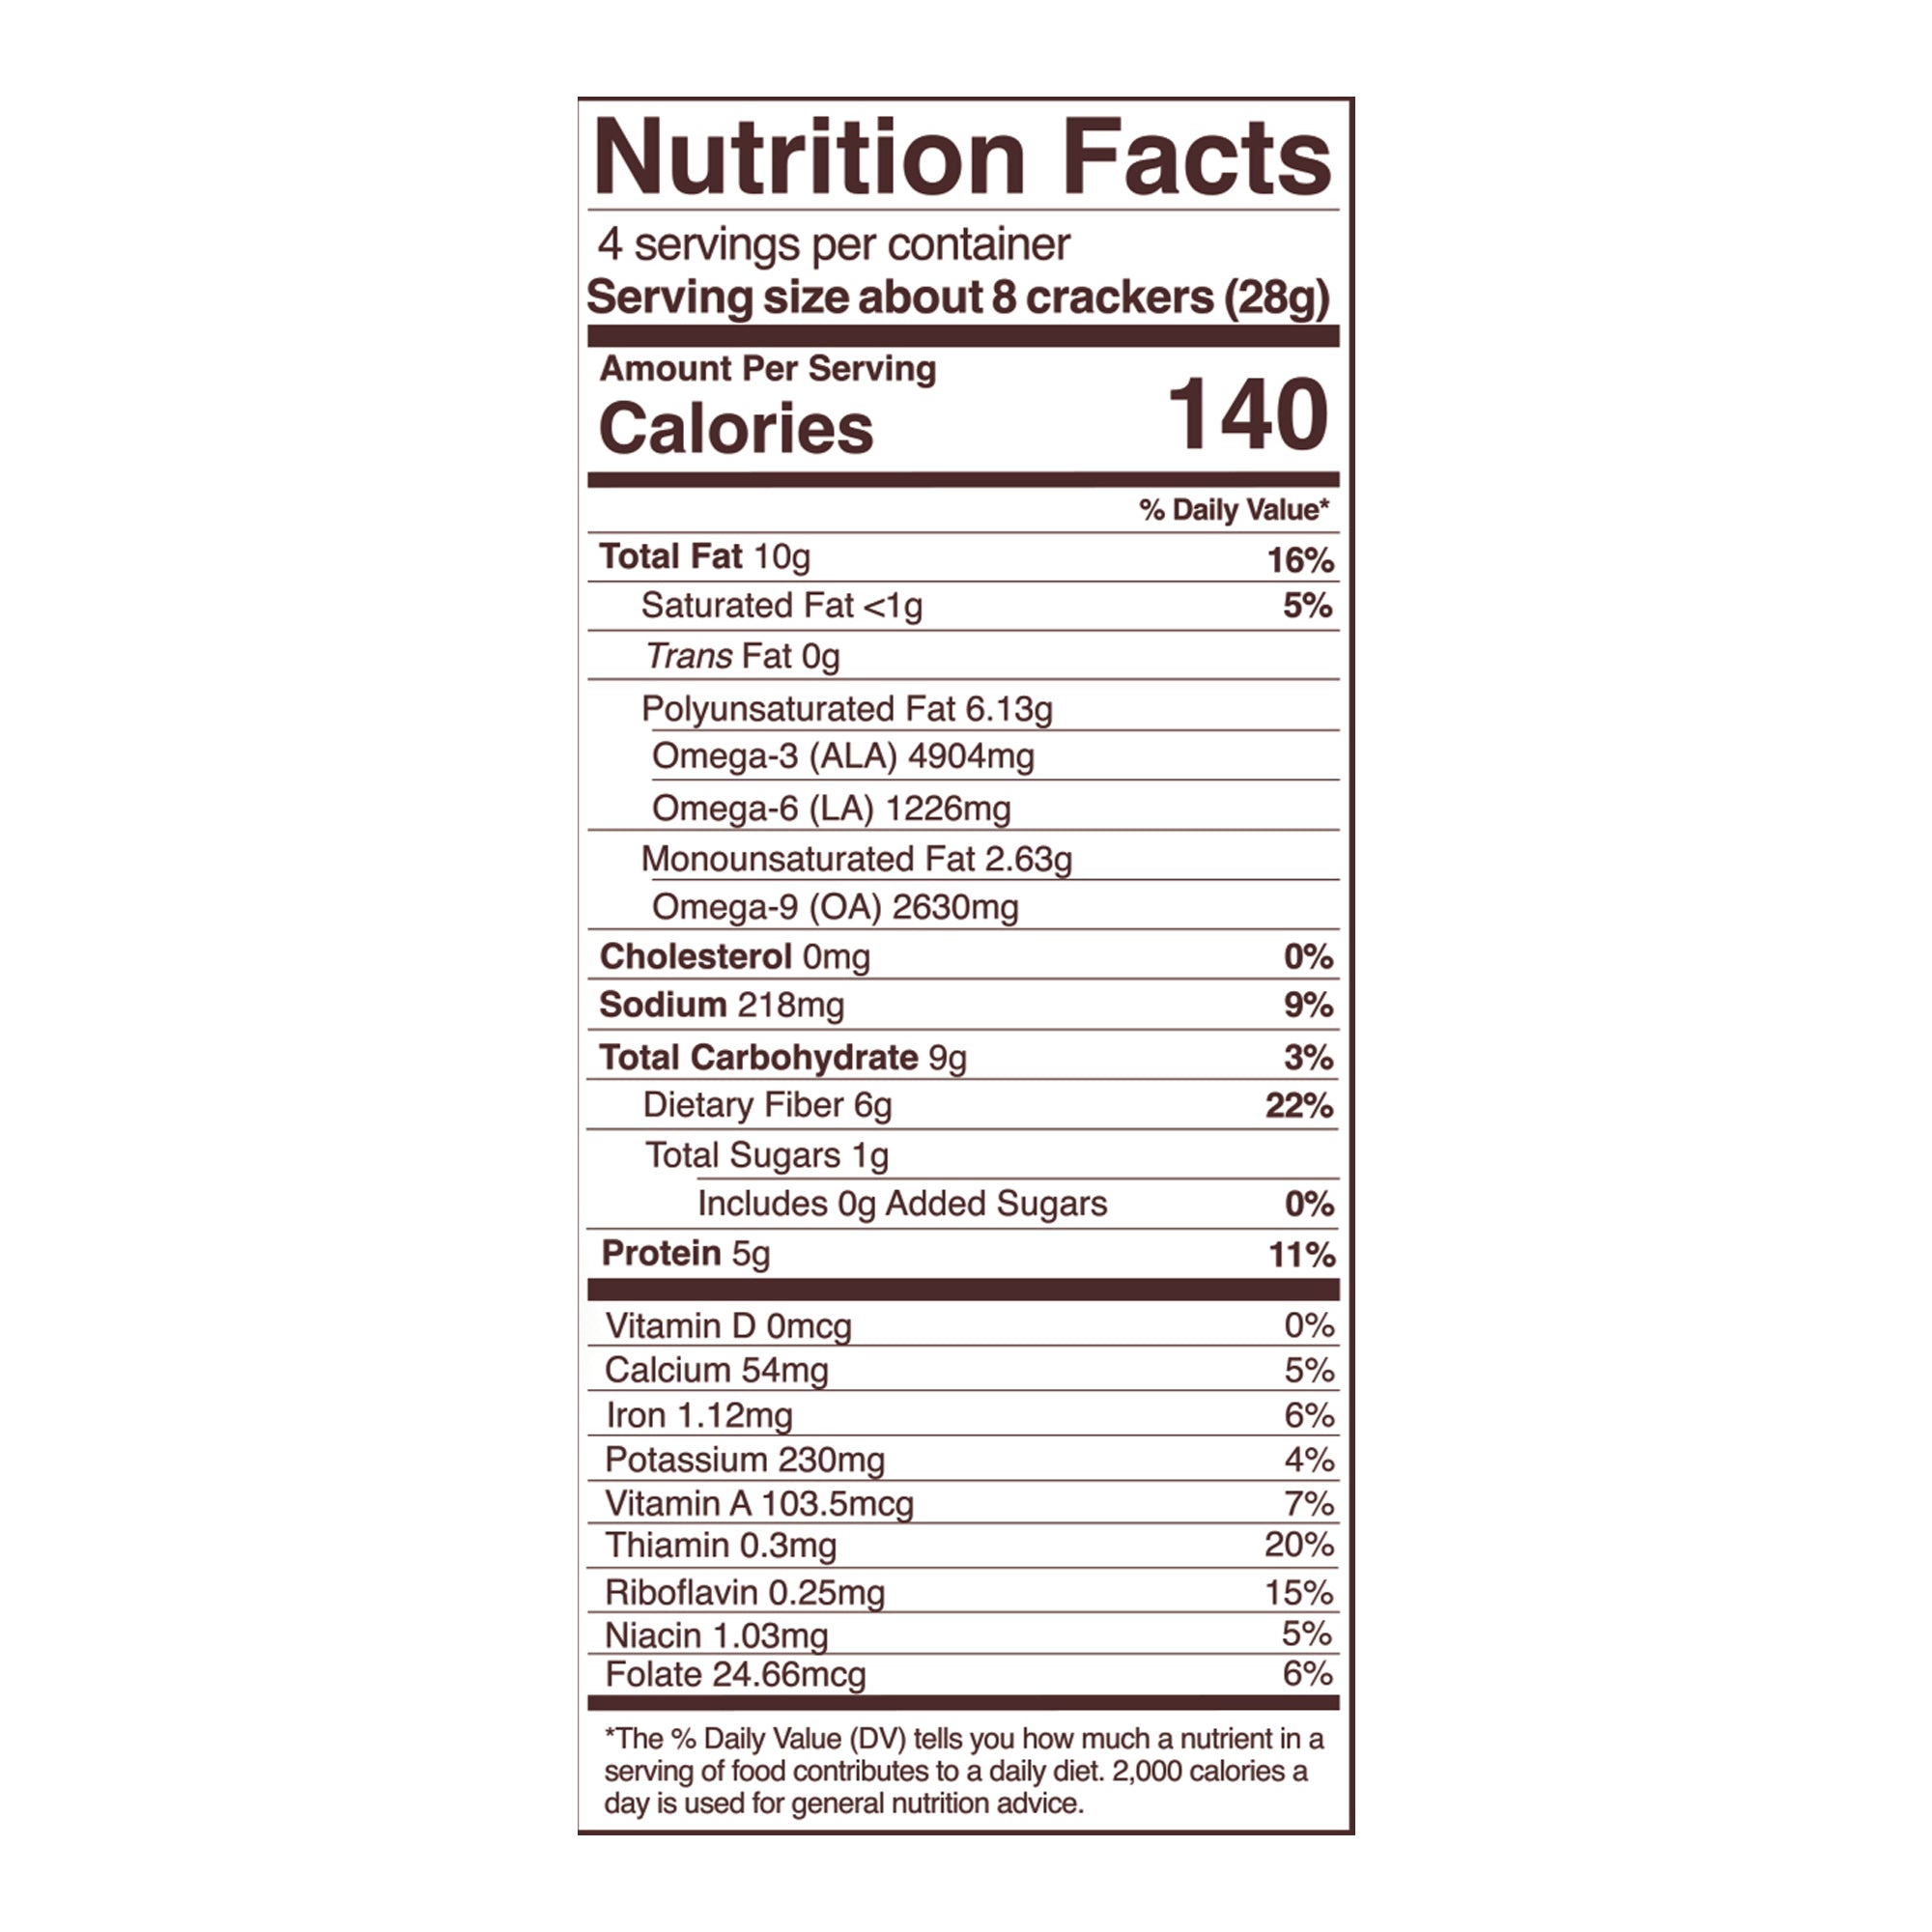 tomato &amp; herb sprouted crisps nutrition fact panel